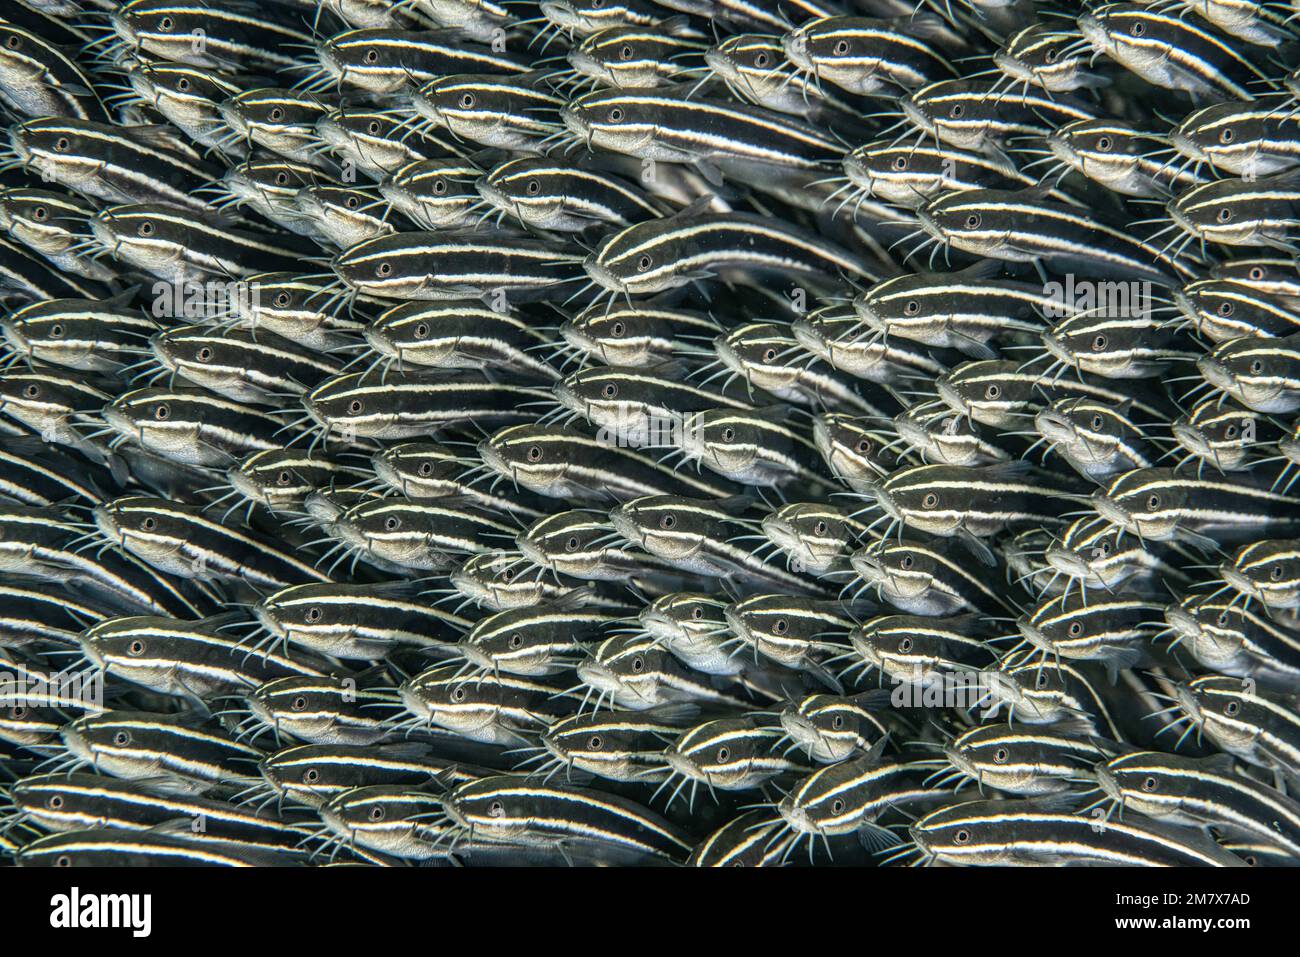 A catfish wall. Mozambique: THESE INCREDIBLE images show off a school of catfish forming a wall along the seafloor, like a cloud of fish. One image sh Stock Photo